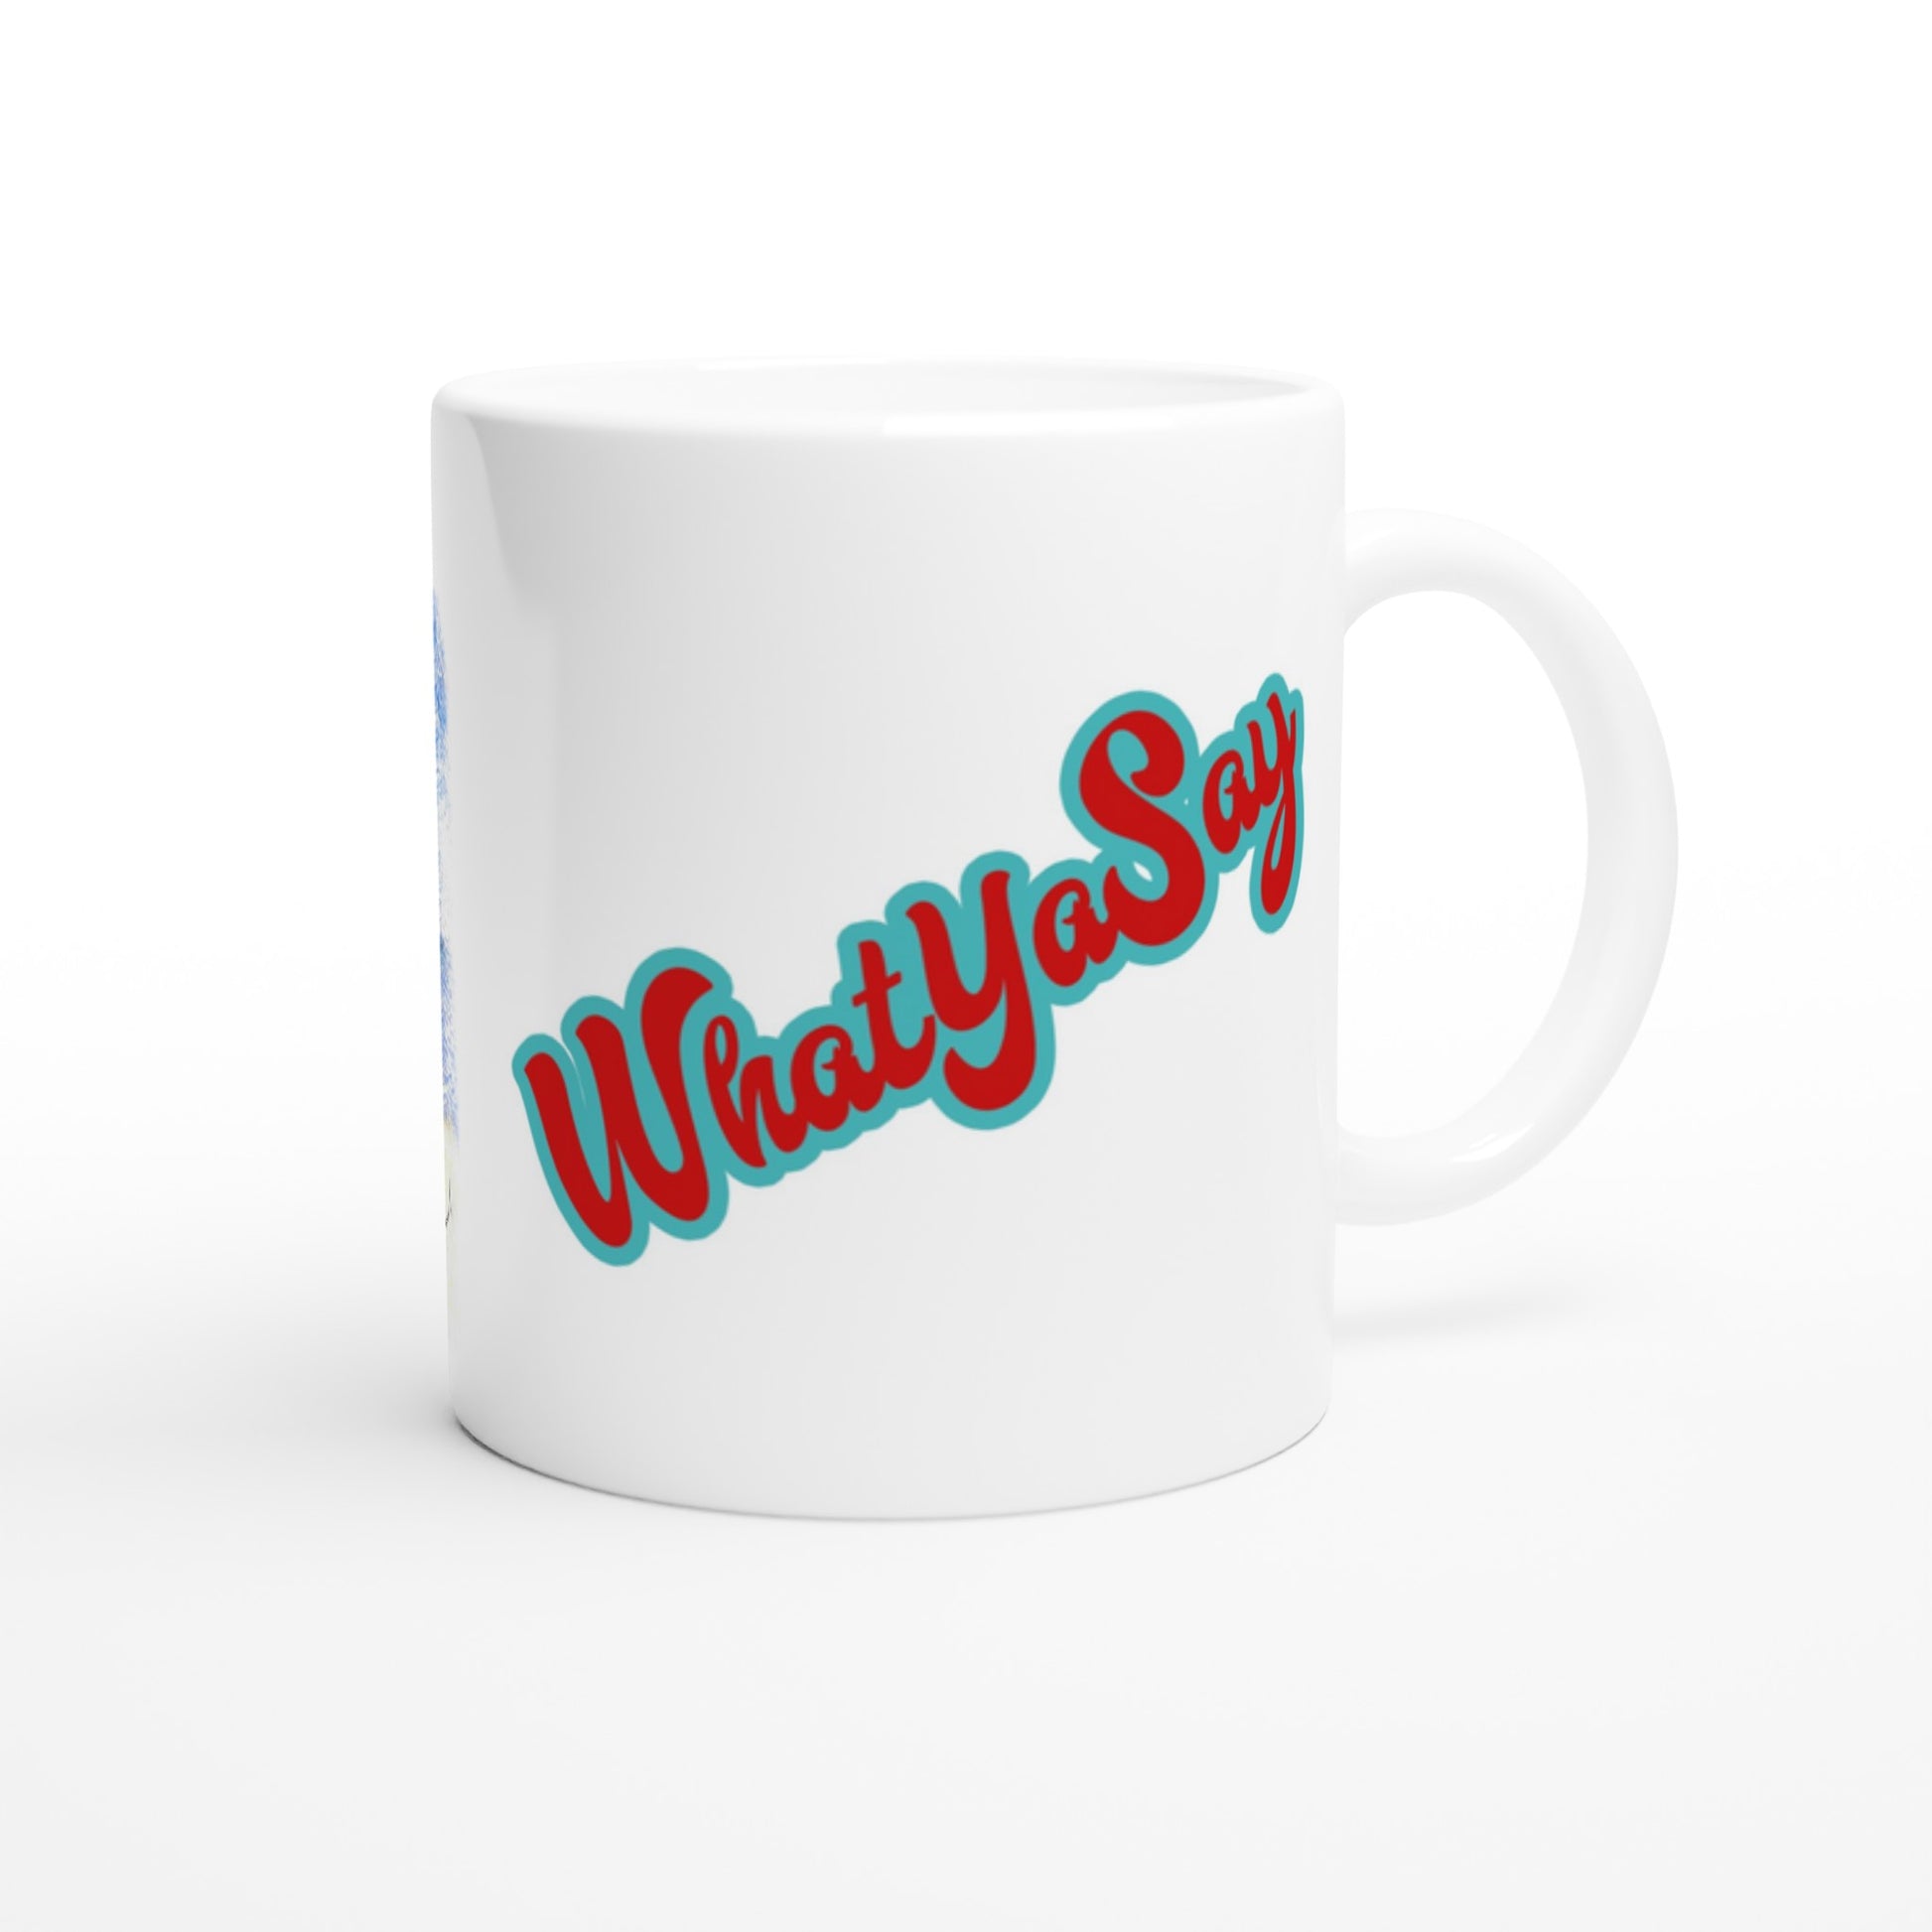 Personalized white ceramic 11oz mug with personalized motto [Your Name] I need my Ass in the Sand and a Beer in my hand front side and WhatYa Say logo on back dishwasher and microwave safe ceramic coffee mug from WhatYa Say Apparel rear view.